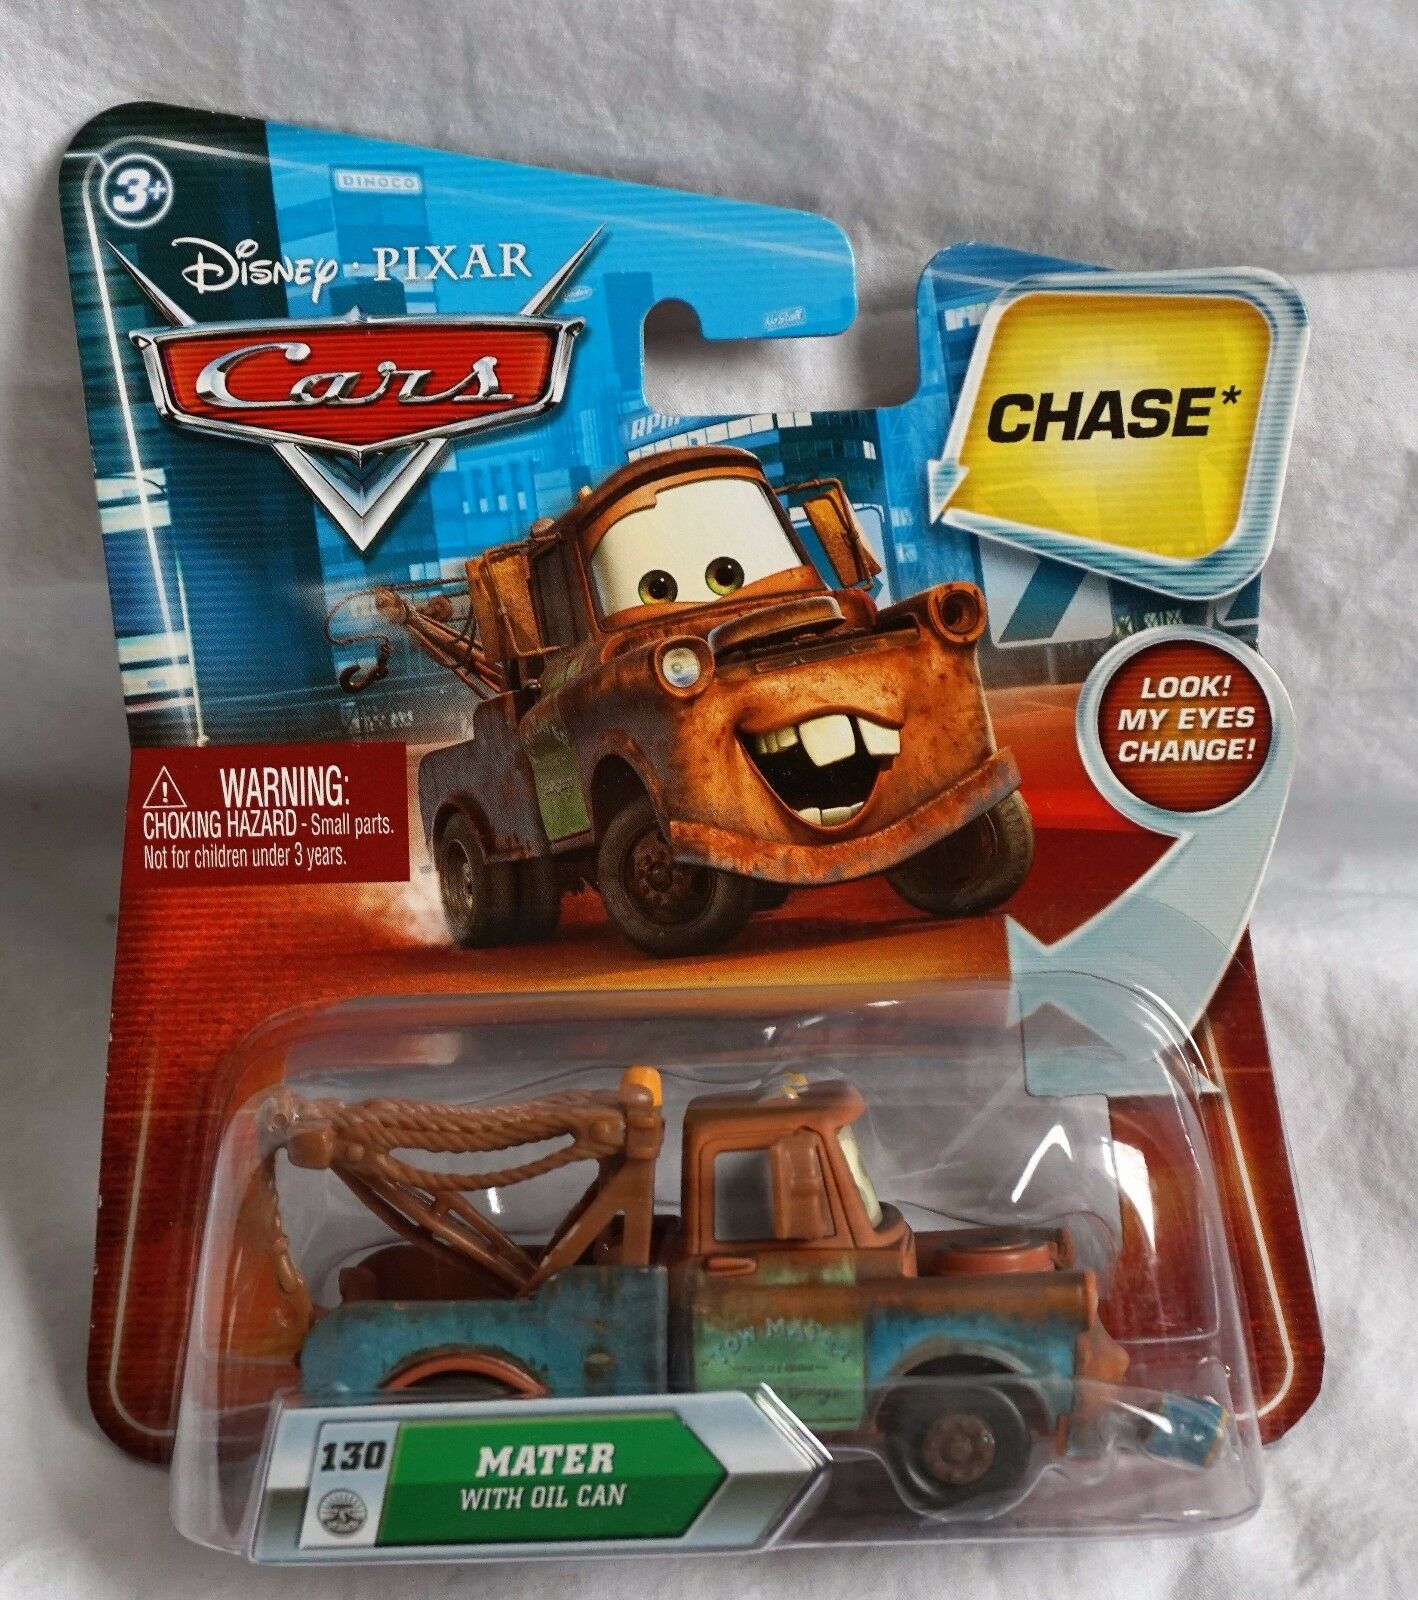 Disney Pixar CARS Movie 1:55 Die Cast Mater with Oil Can #130 w/ Lenticular Eyes! 1